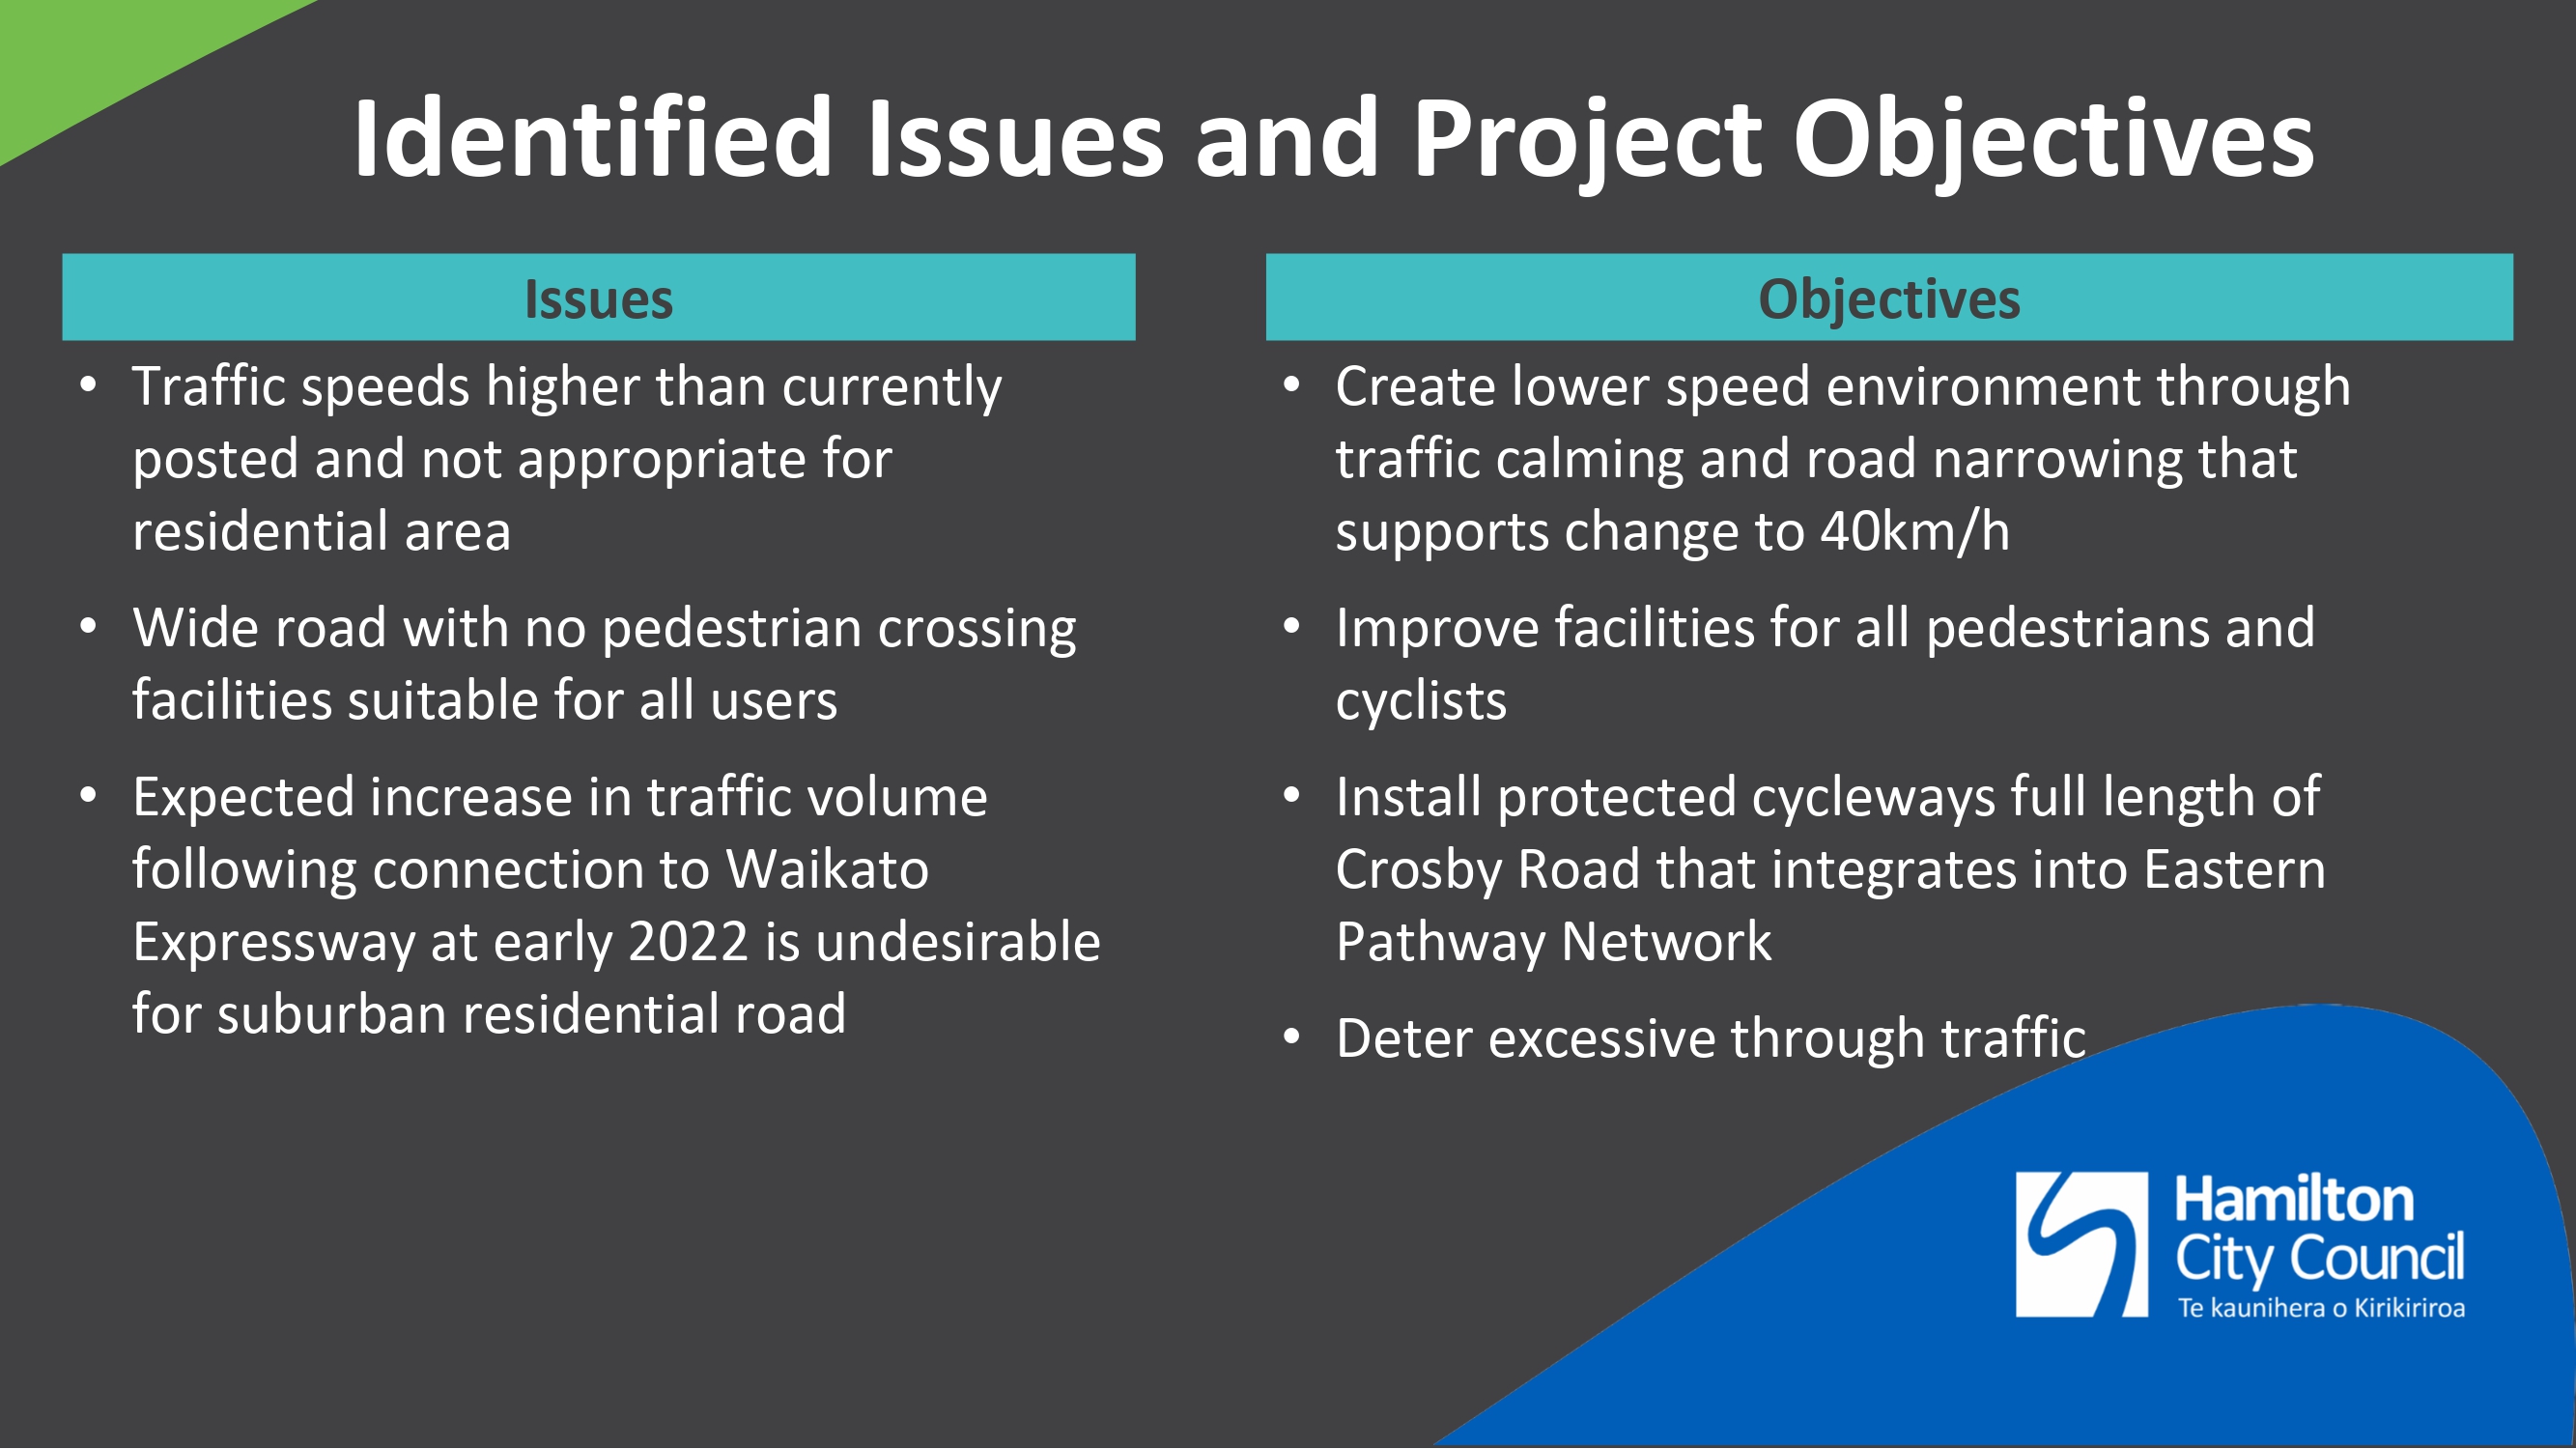 Identified issues and project objectives